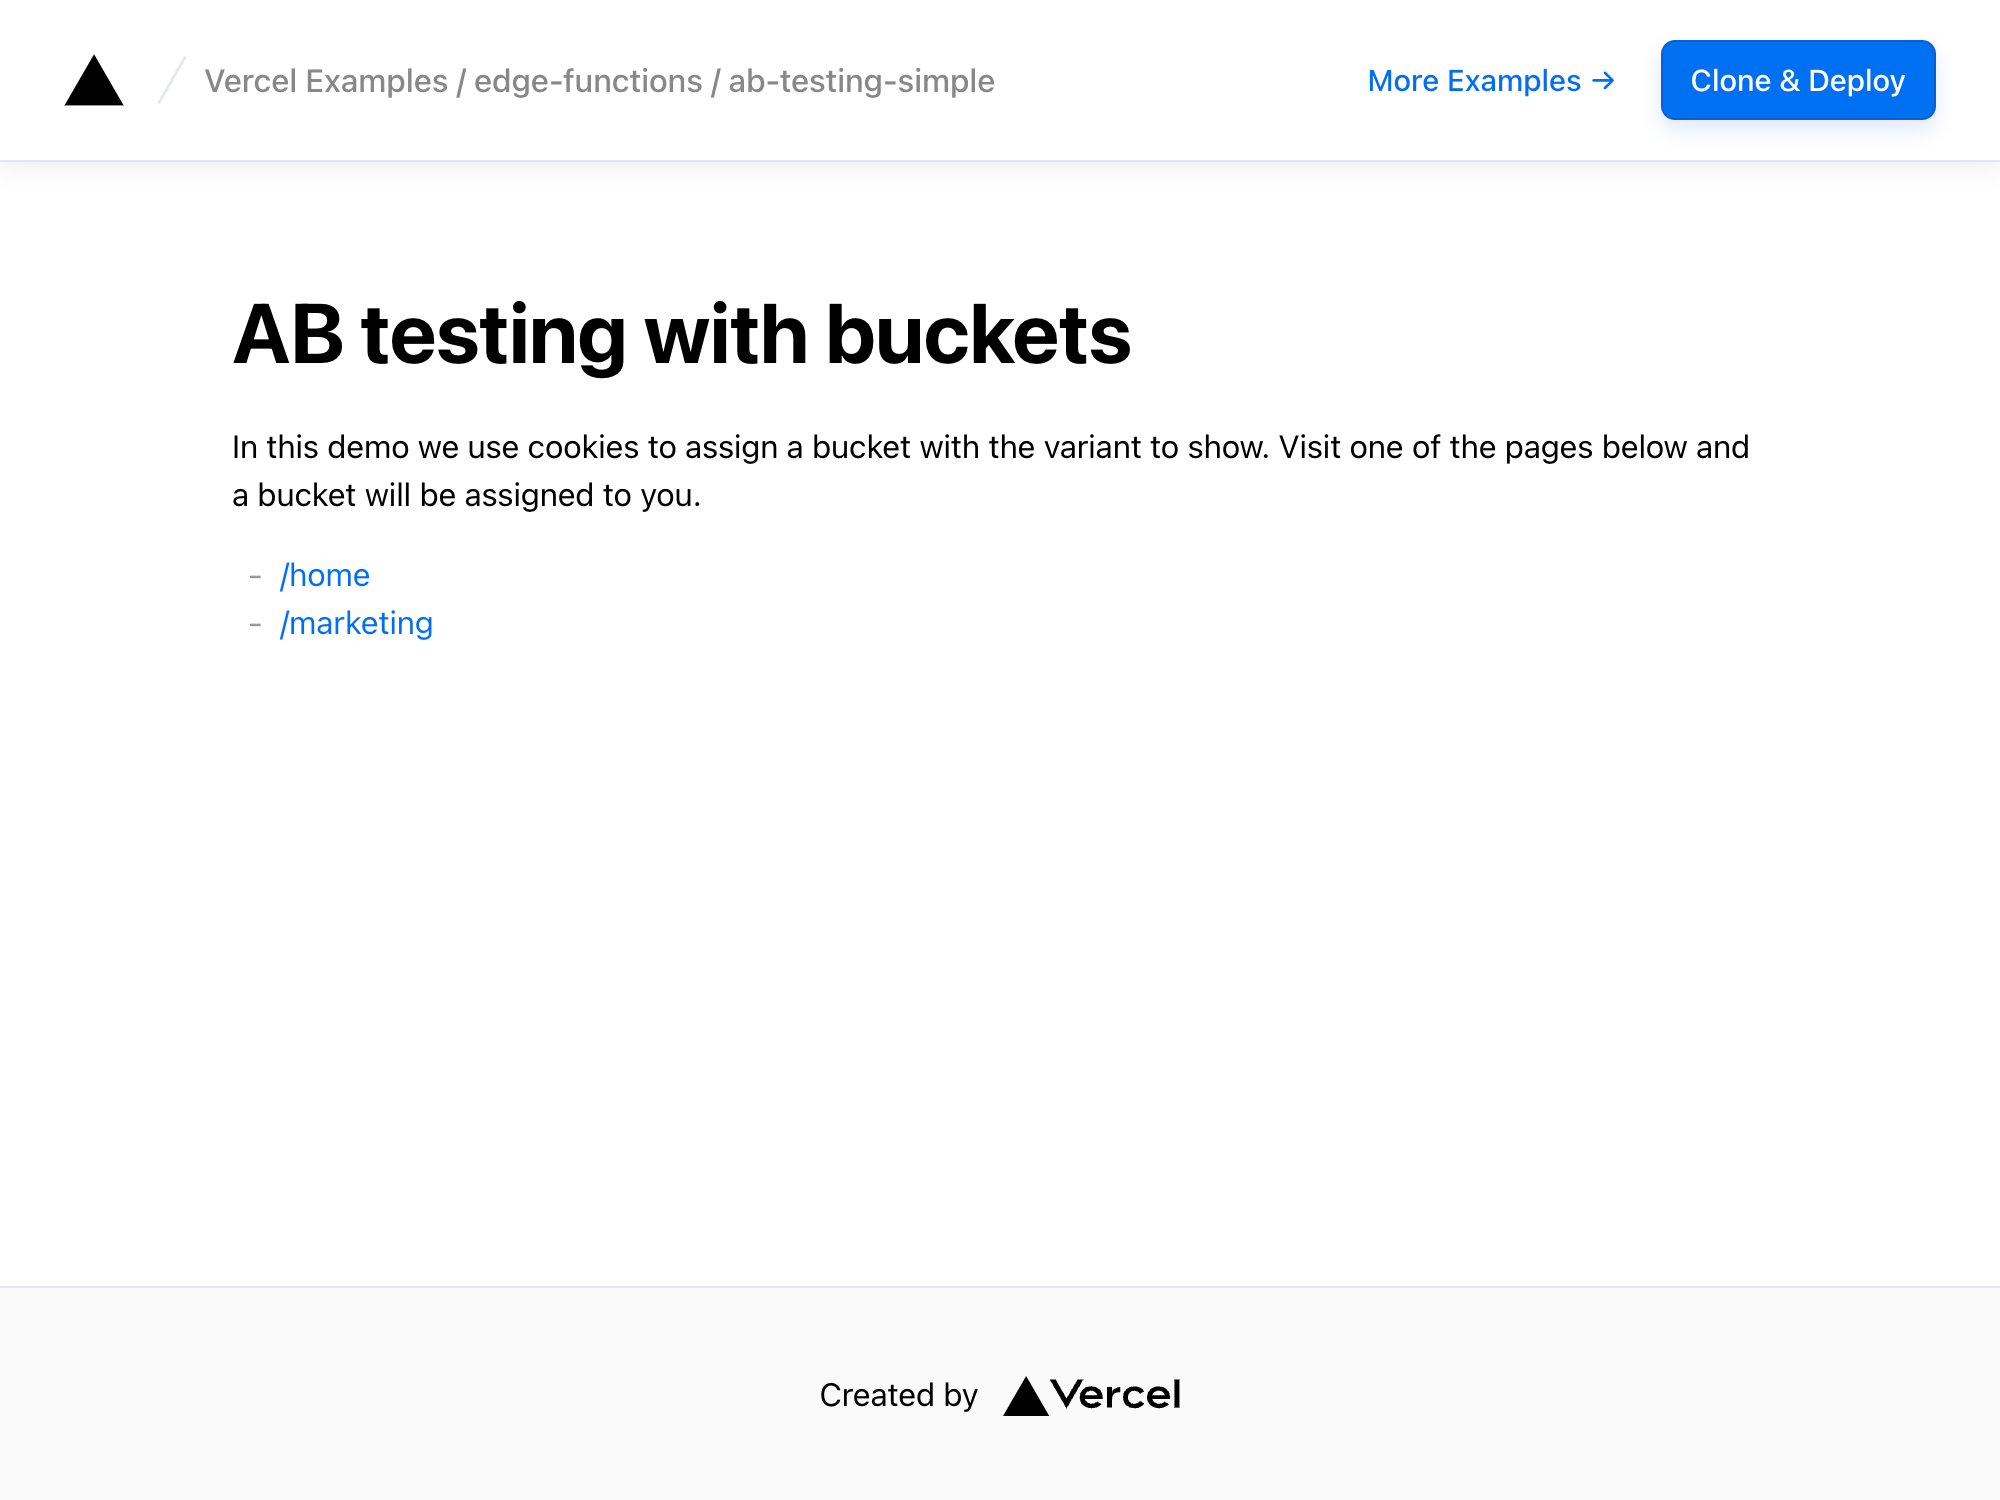 Build your mobile app a/b testing program with feature flags - Optimizely